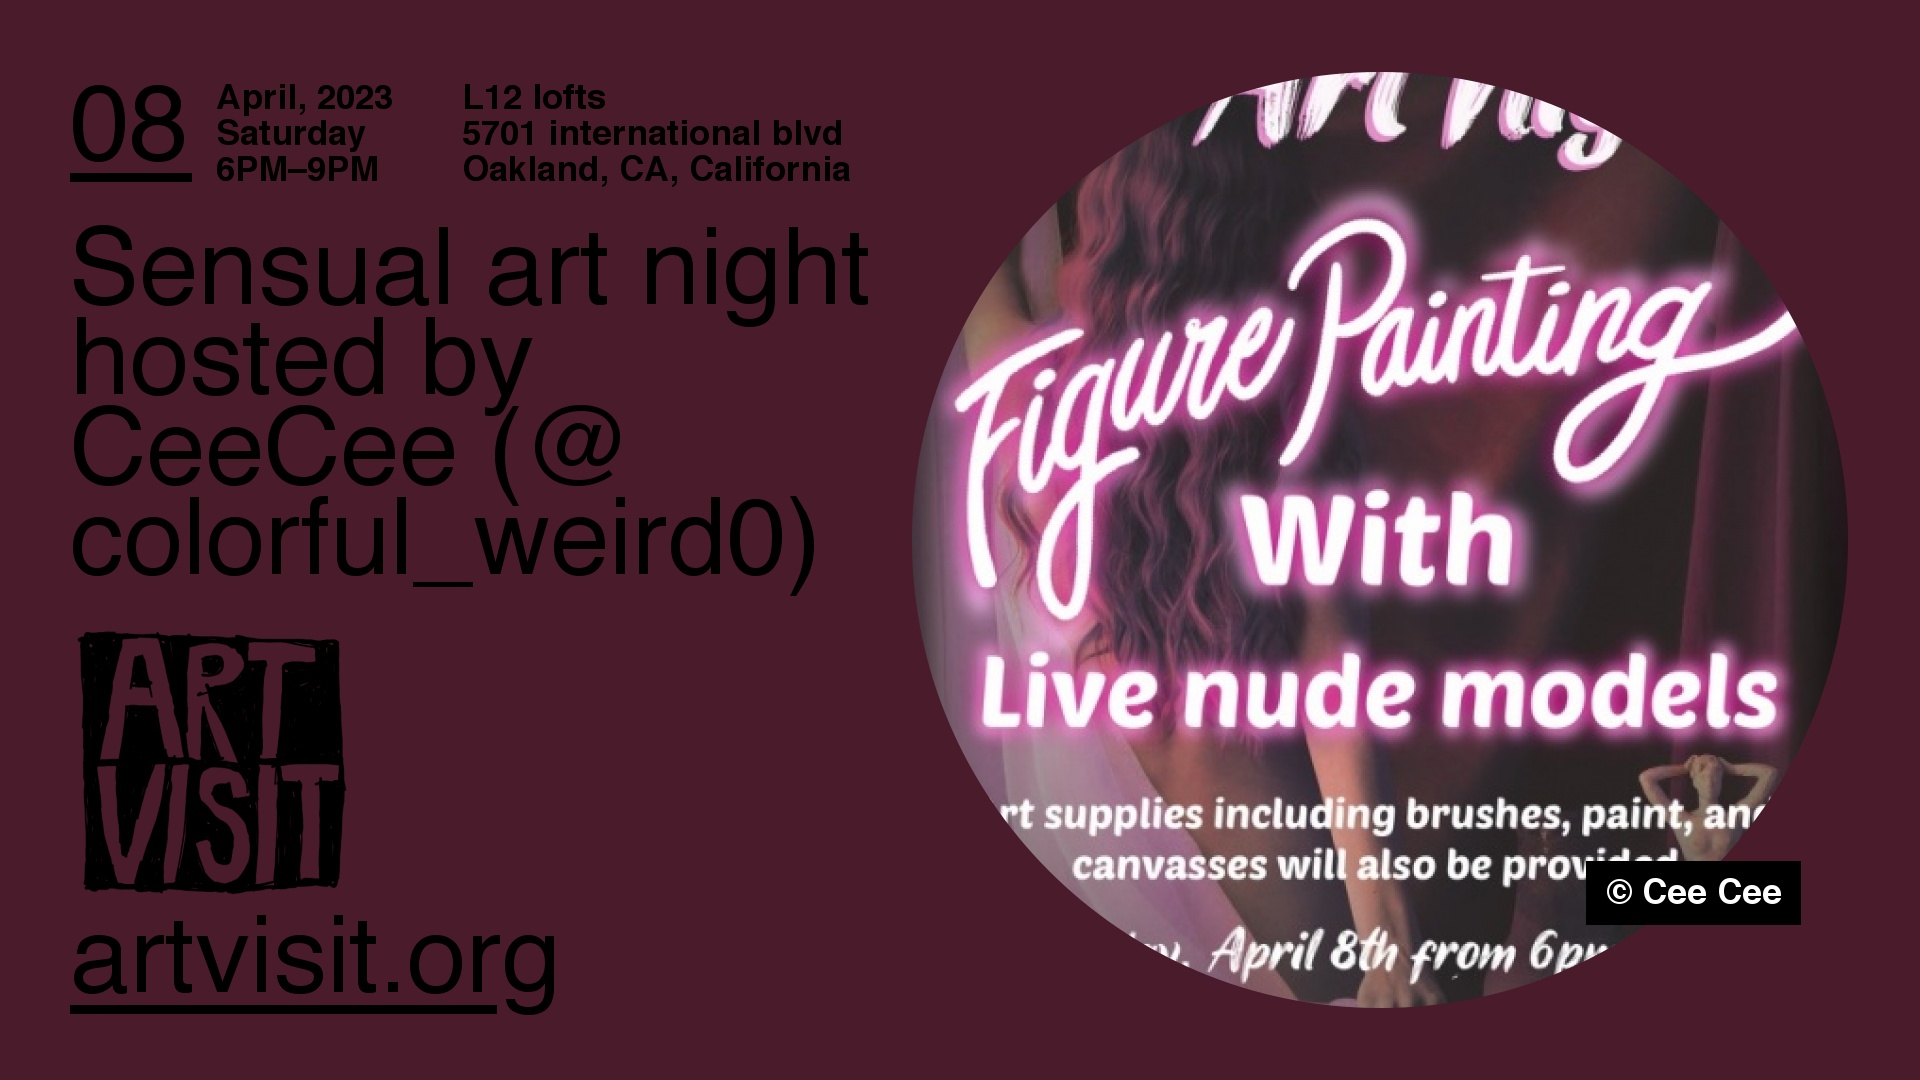 Sensual art night hosted by CeeCee (@colorful_weird0)